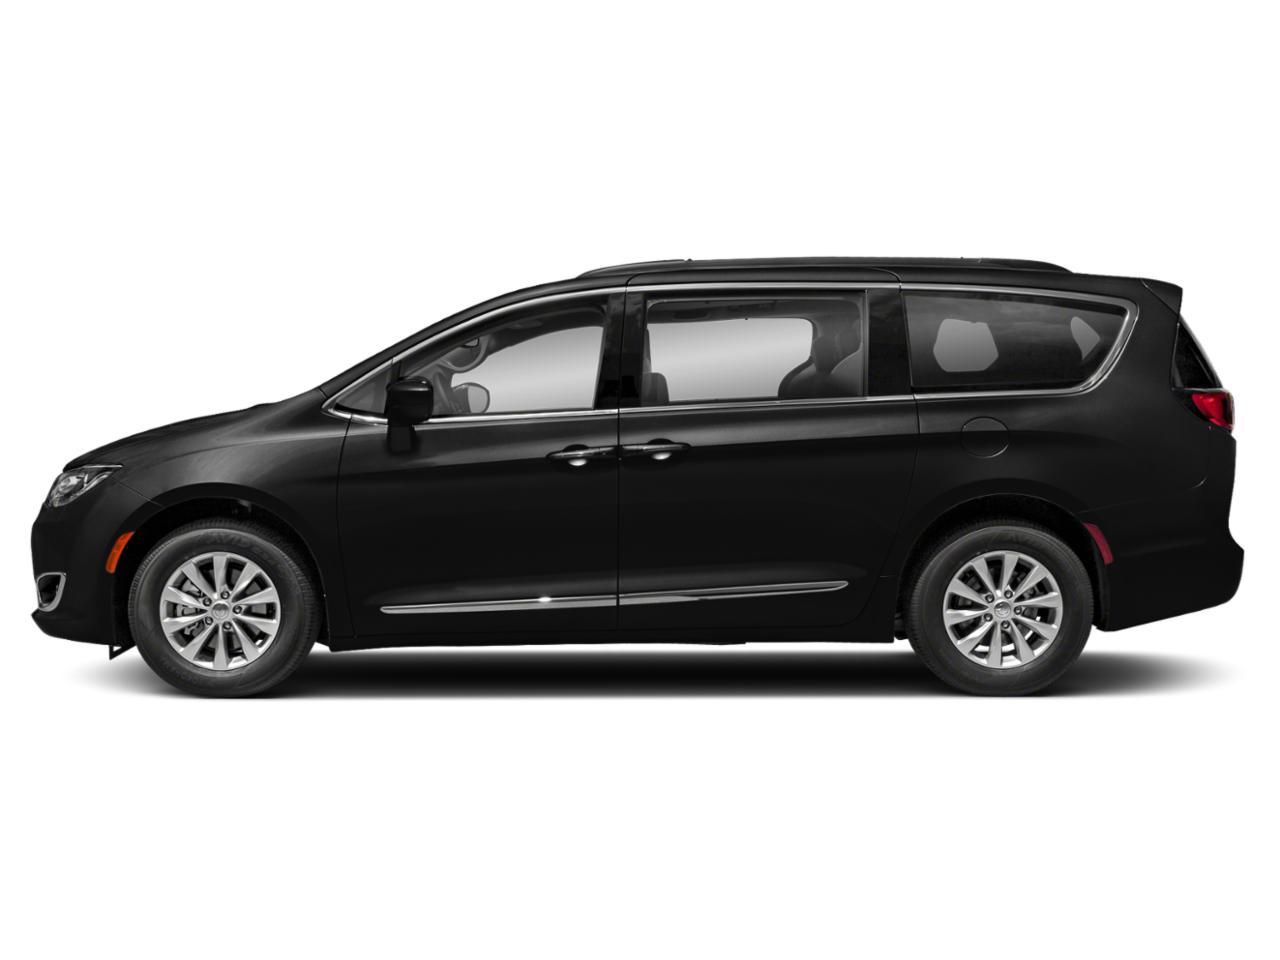 2018 Chrysler Pacifica Vehicle Photo in Saint Charles, IL 60174